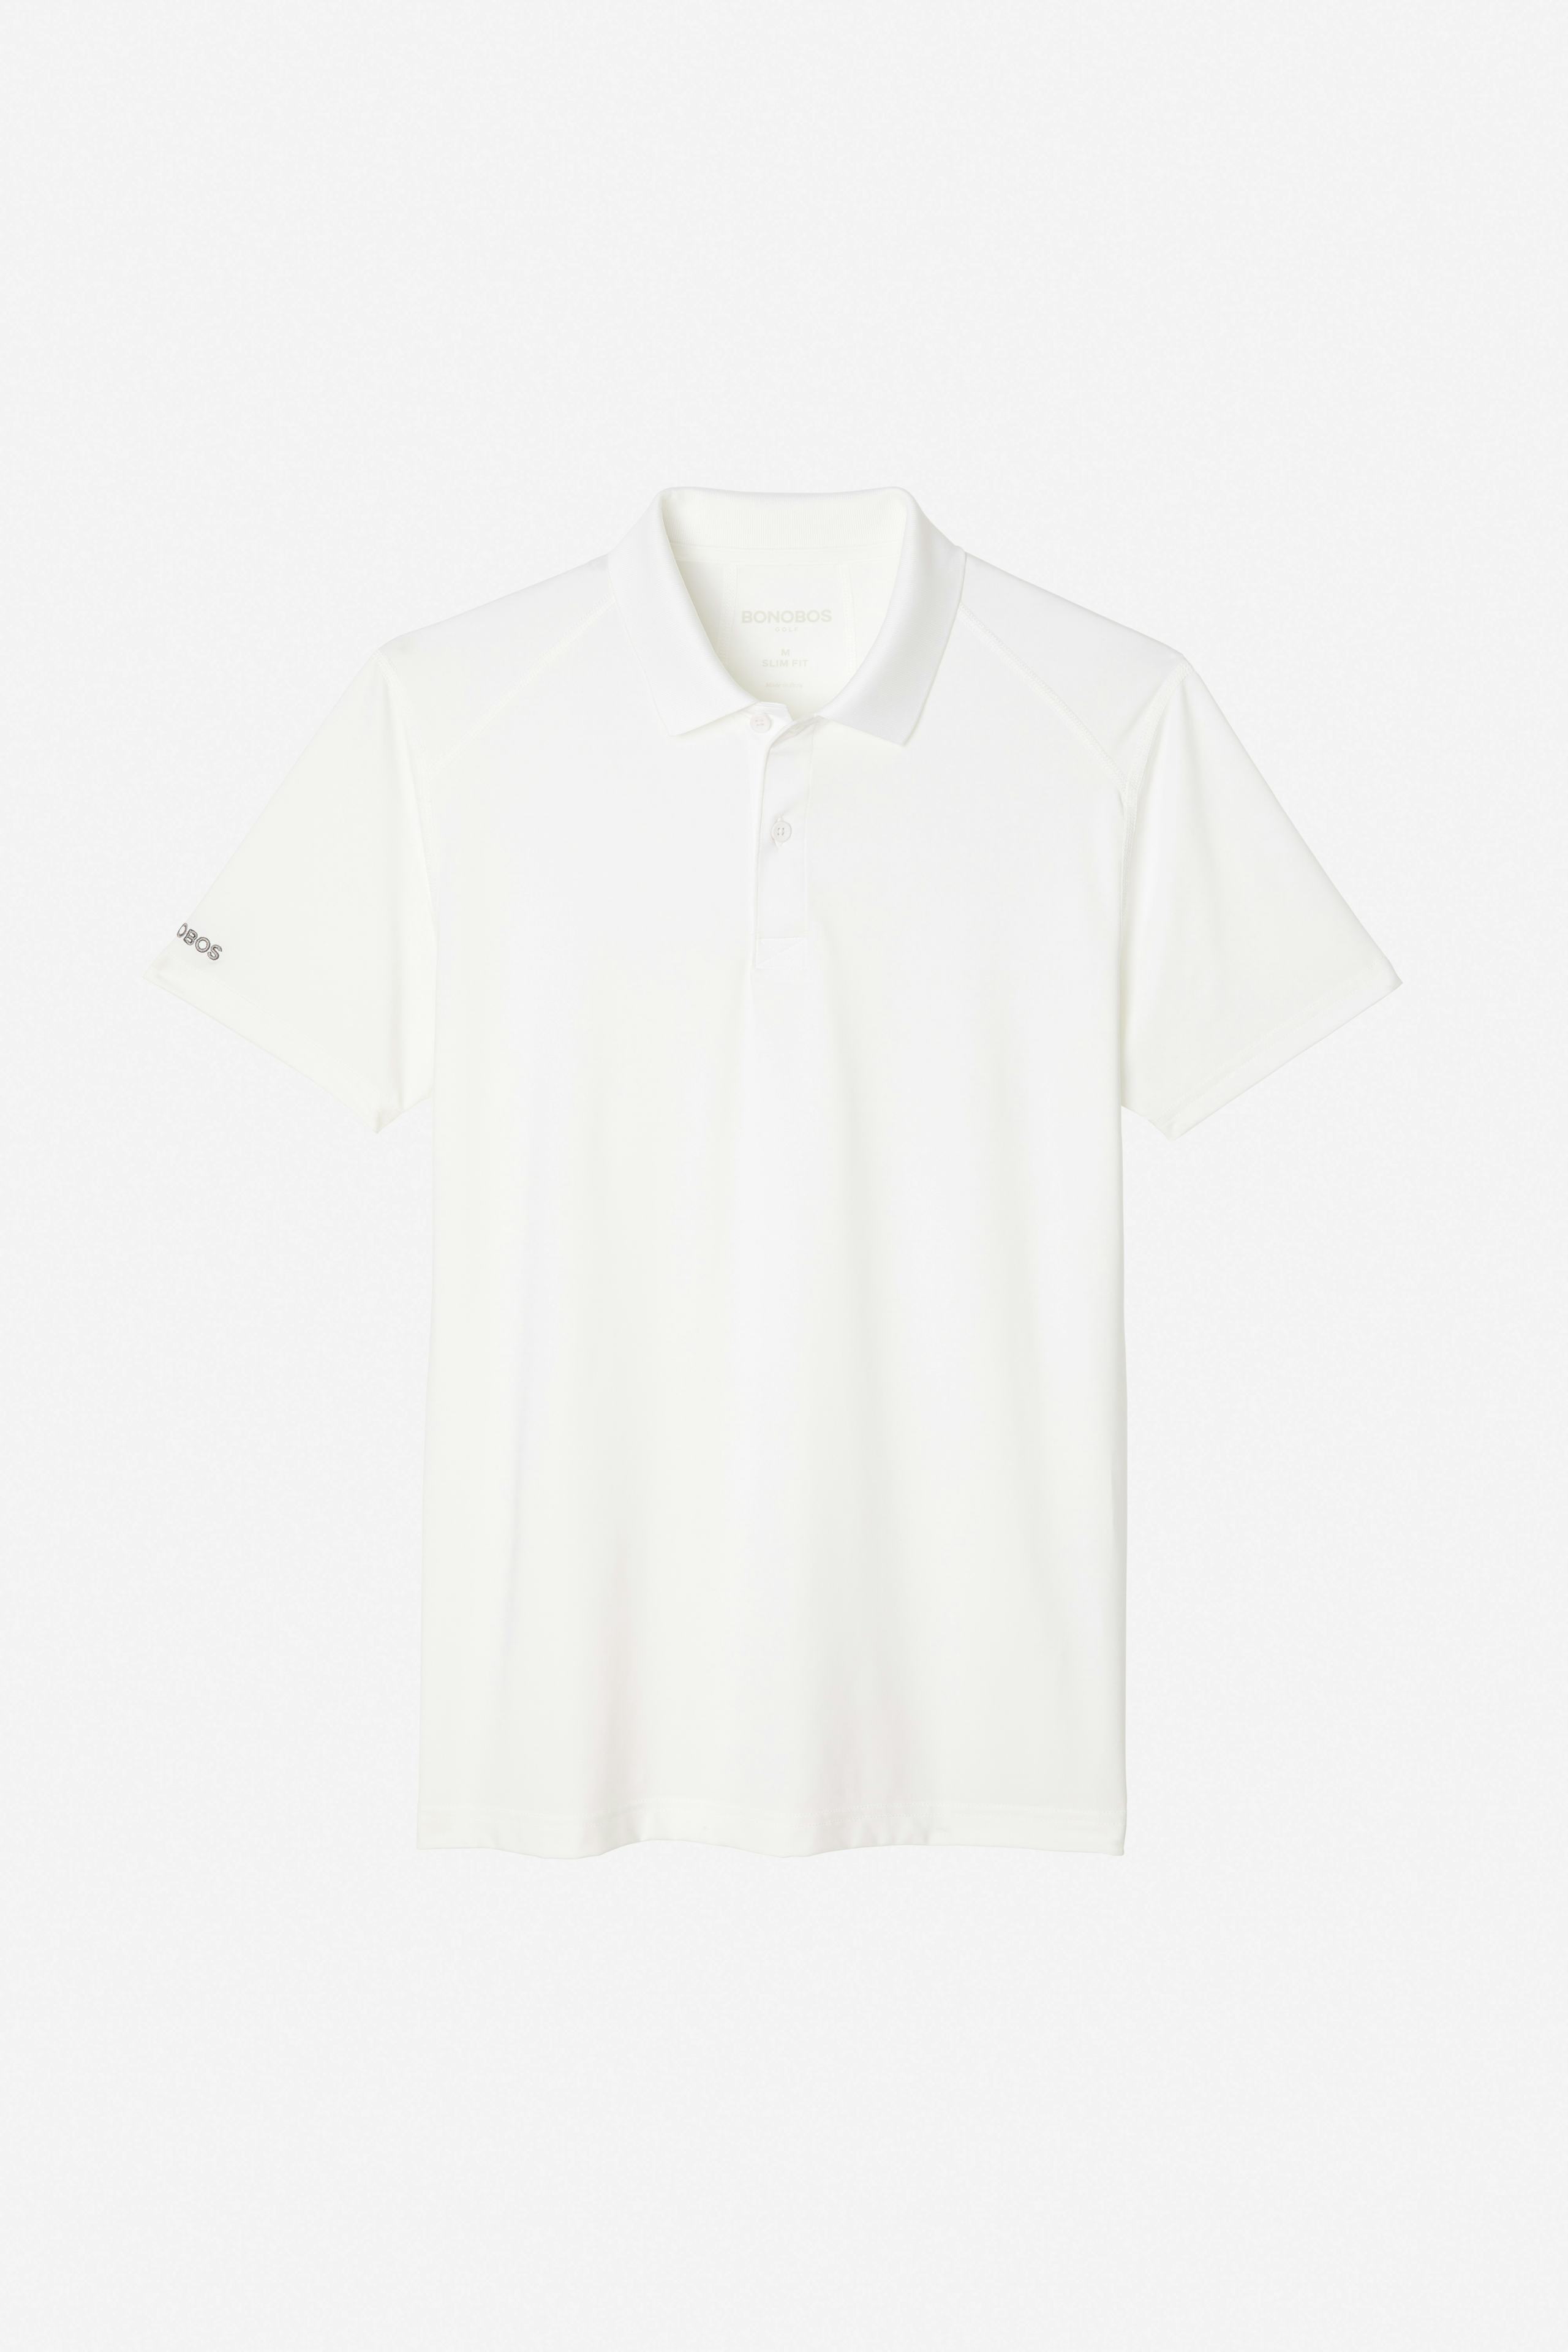 The M-Flex Golf Polo Extended Sizes